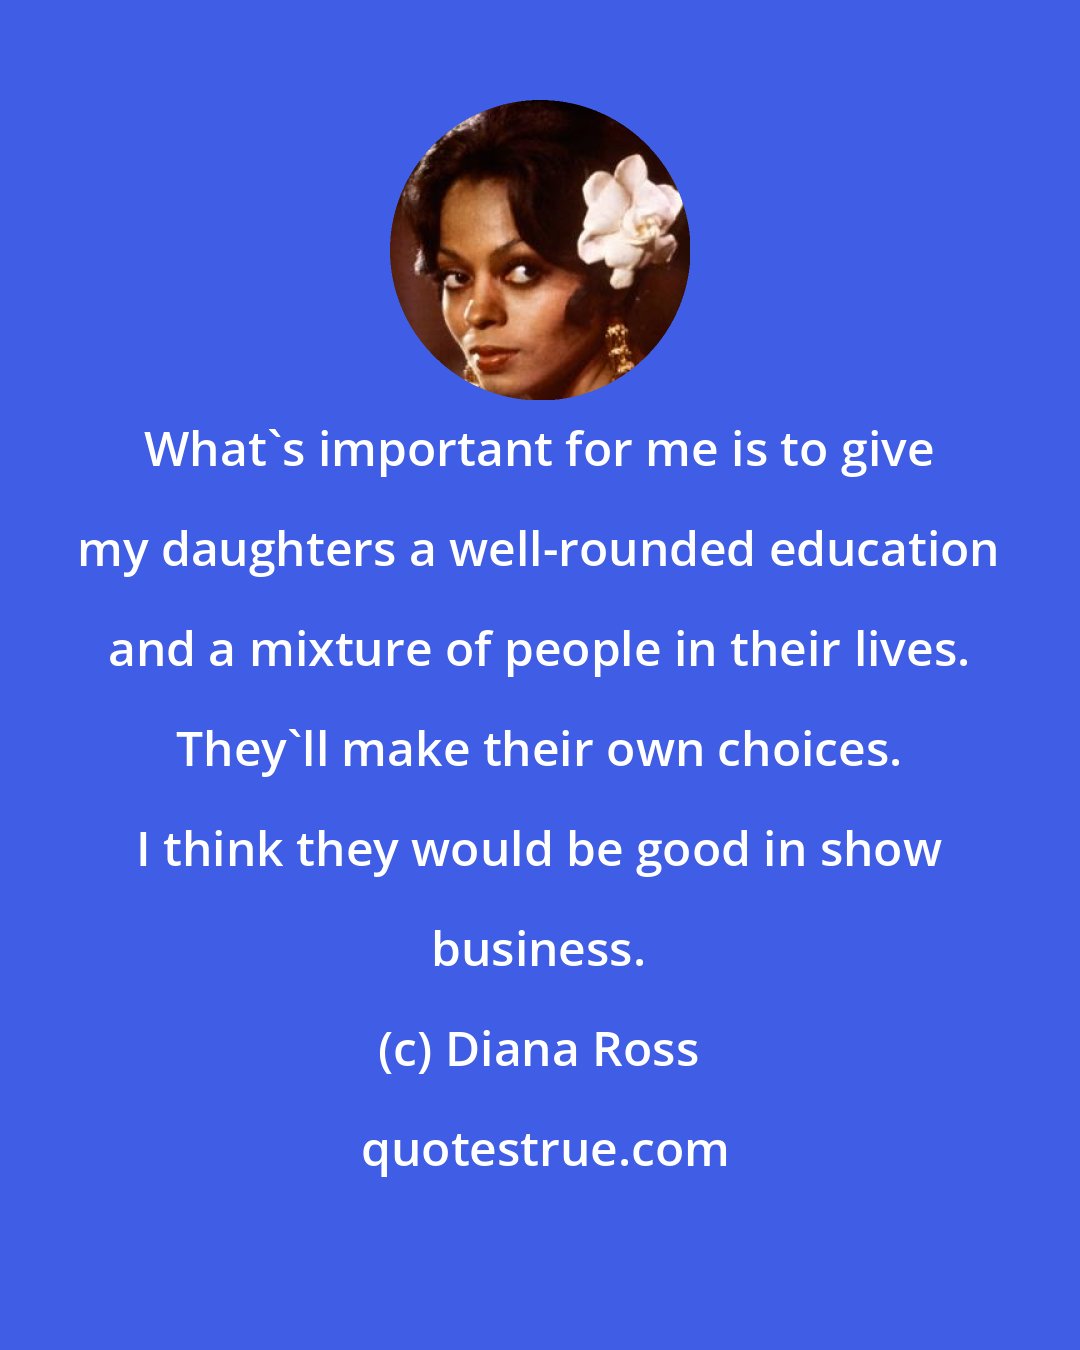 Diana Ross: What's important for me is to give my daughters a well-rounded education and a mixture of people in their lives. They'll make their own choices. I think they would be good in show business.